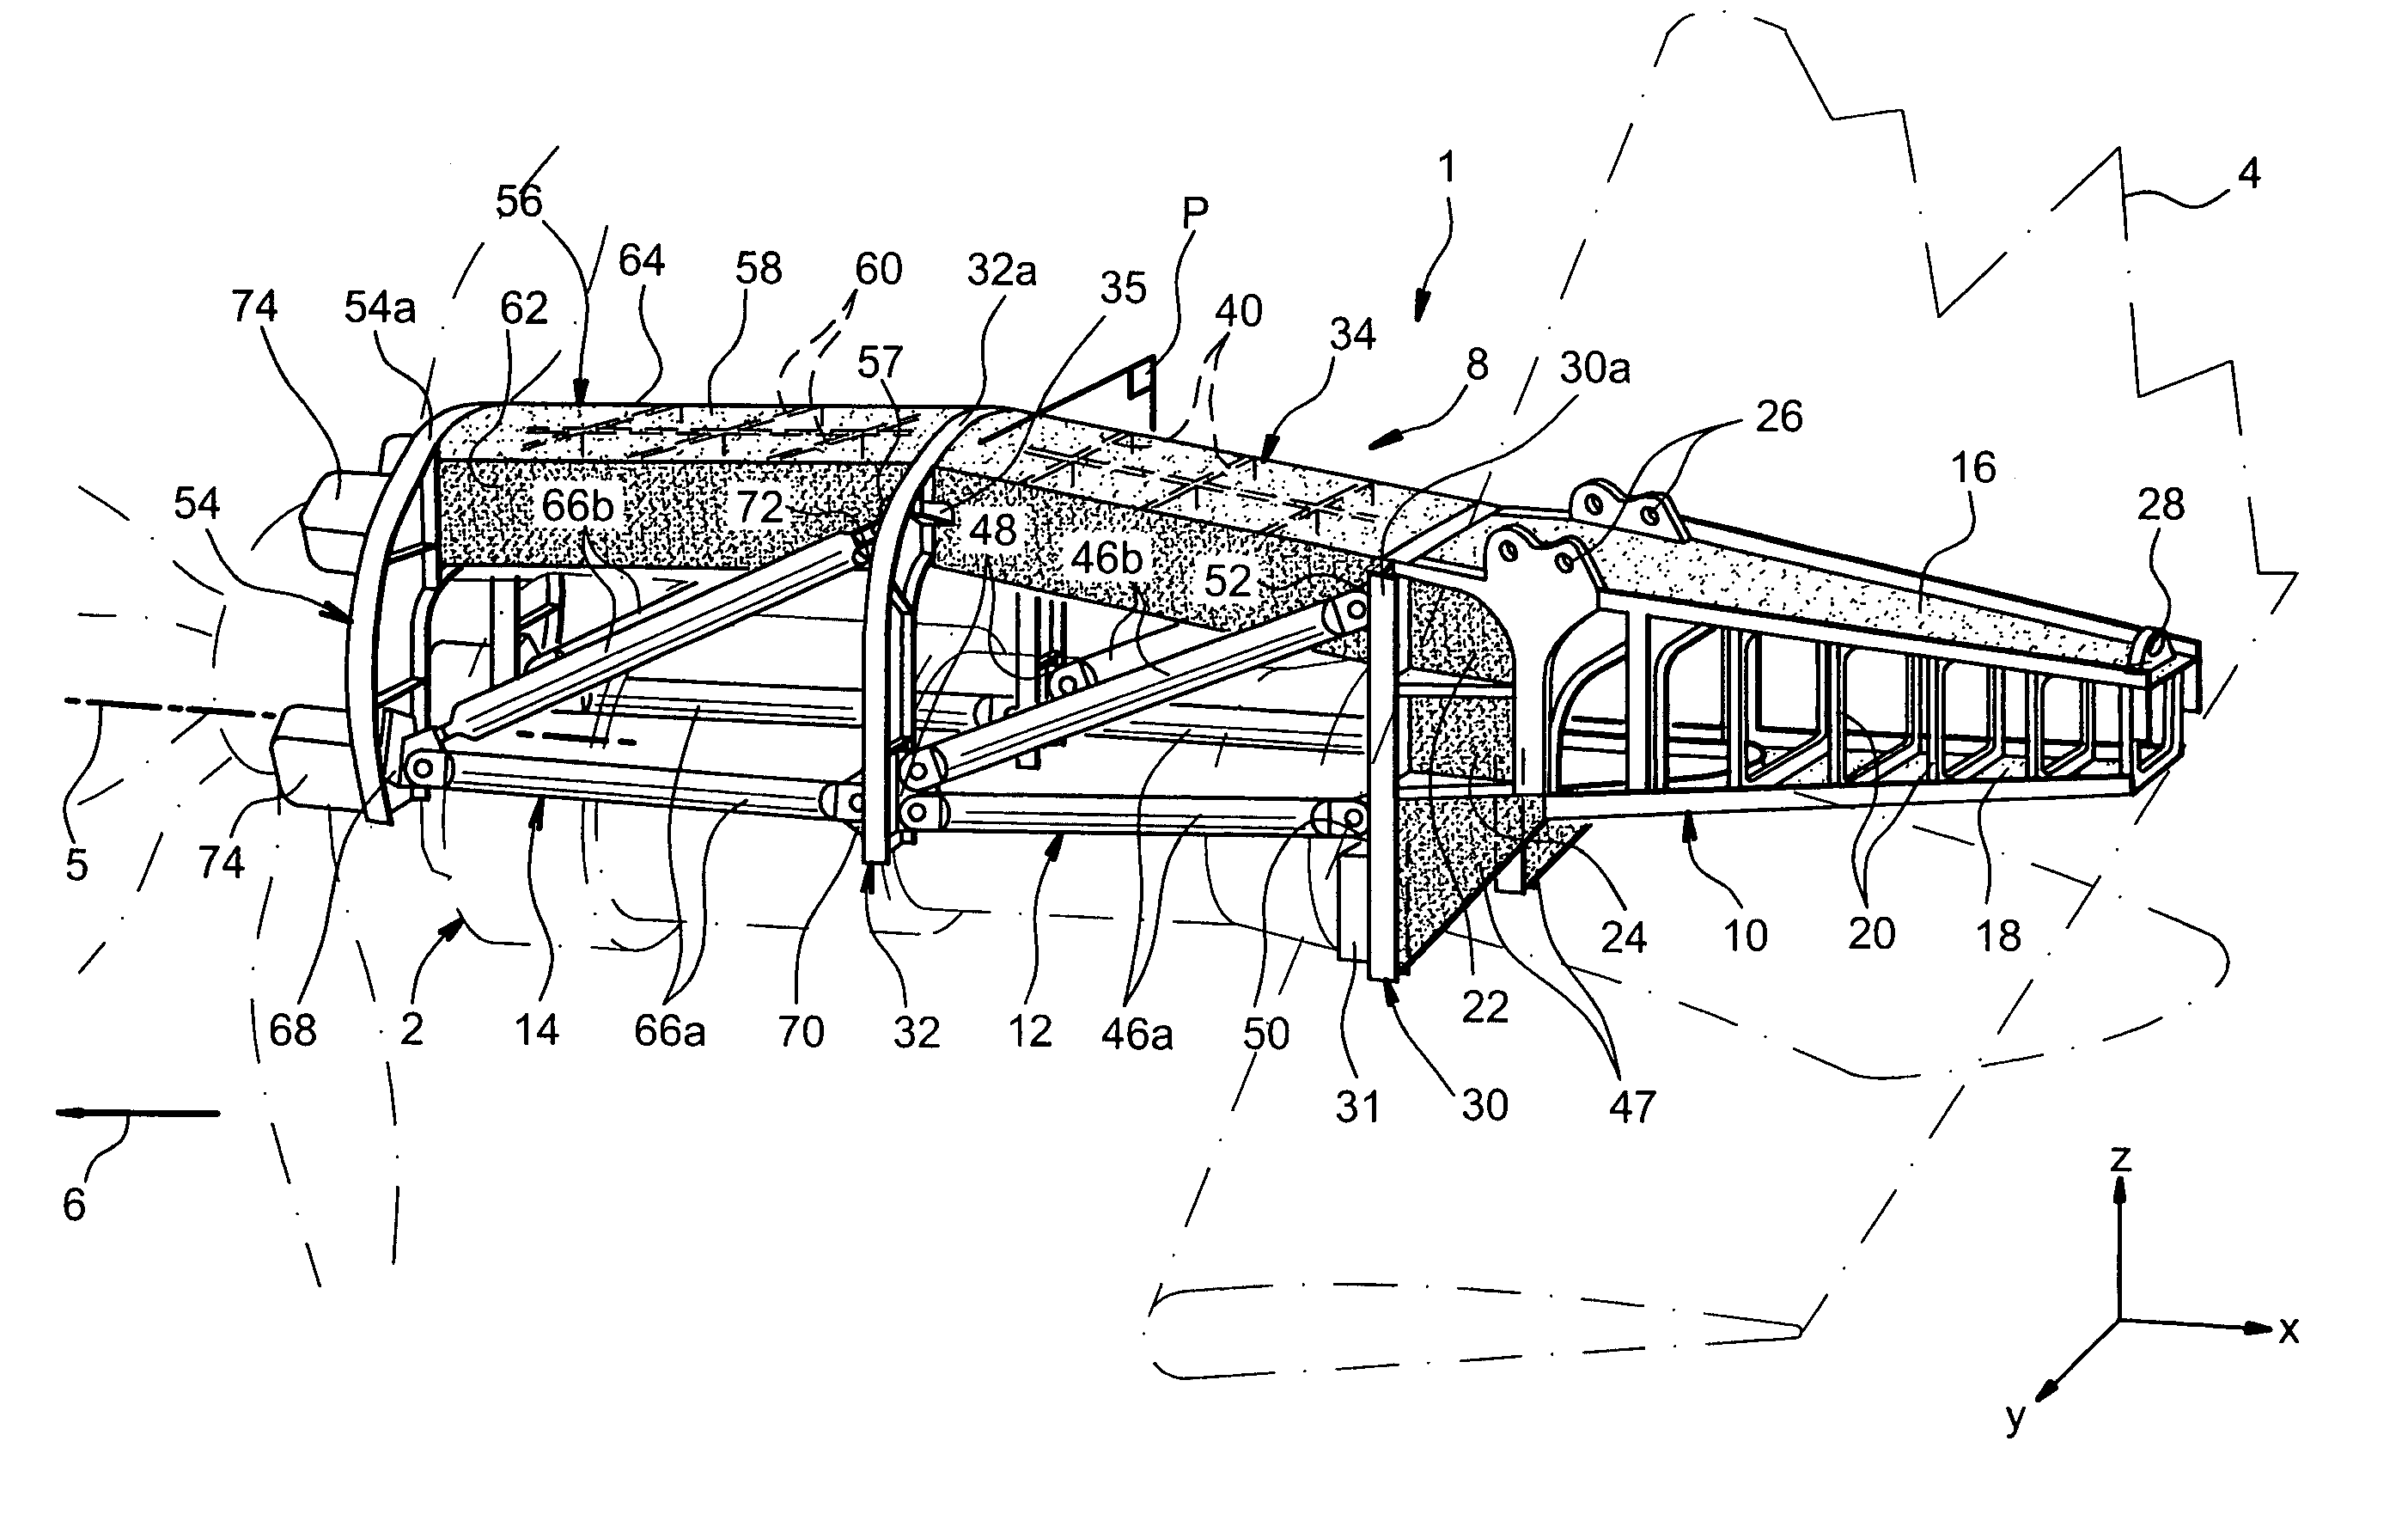 Mounting structure for mounting a turboprop under an aircraft wing